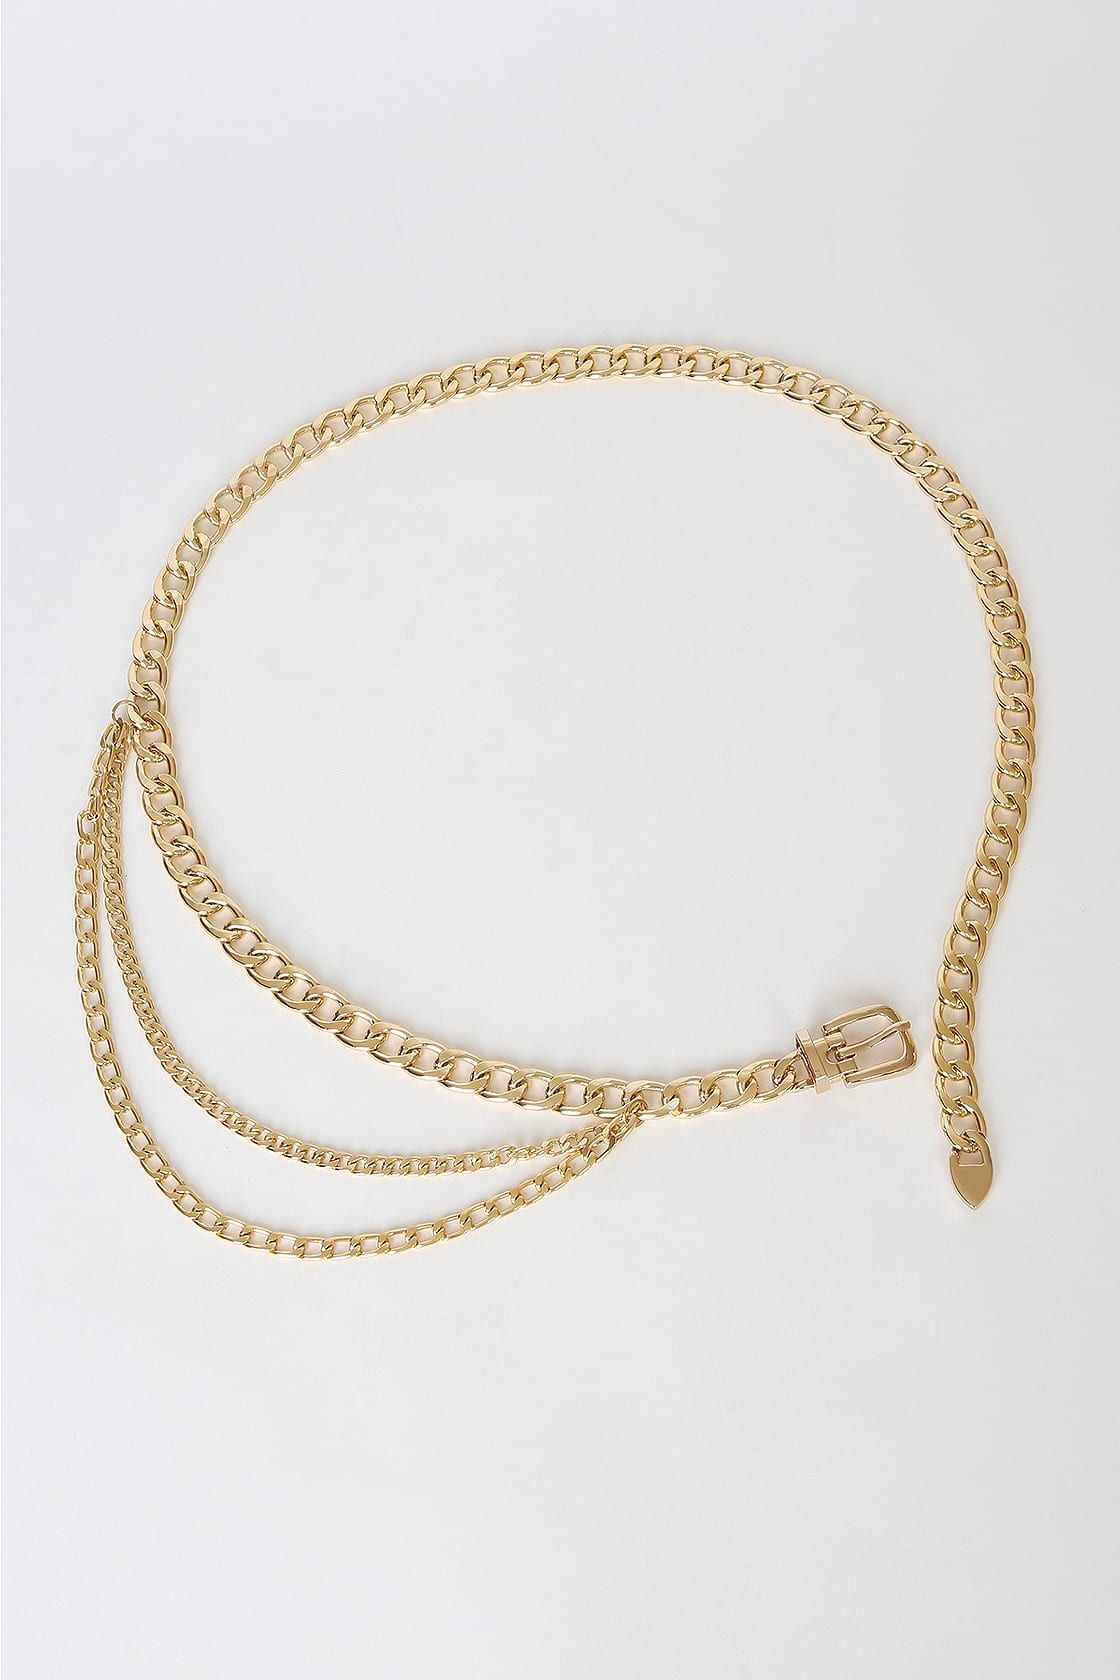 Off The Chains Gold Layered Chain Belt | Lulus (US)